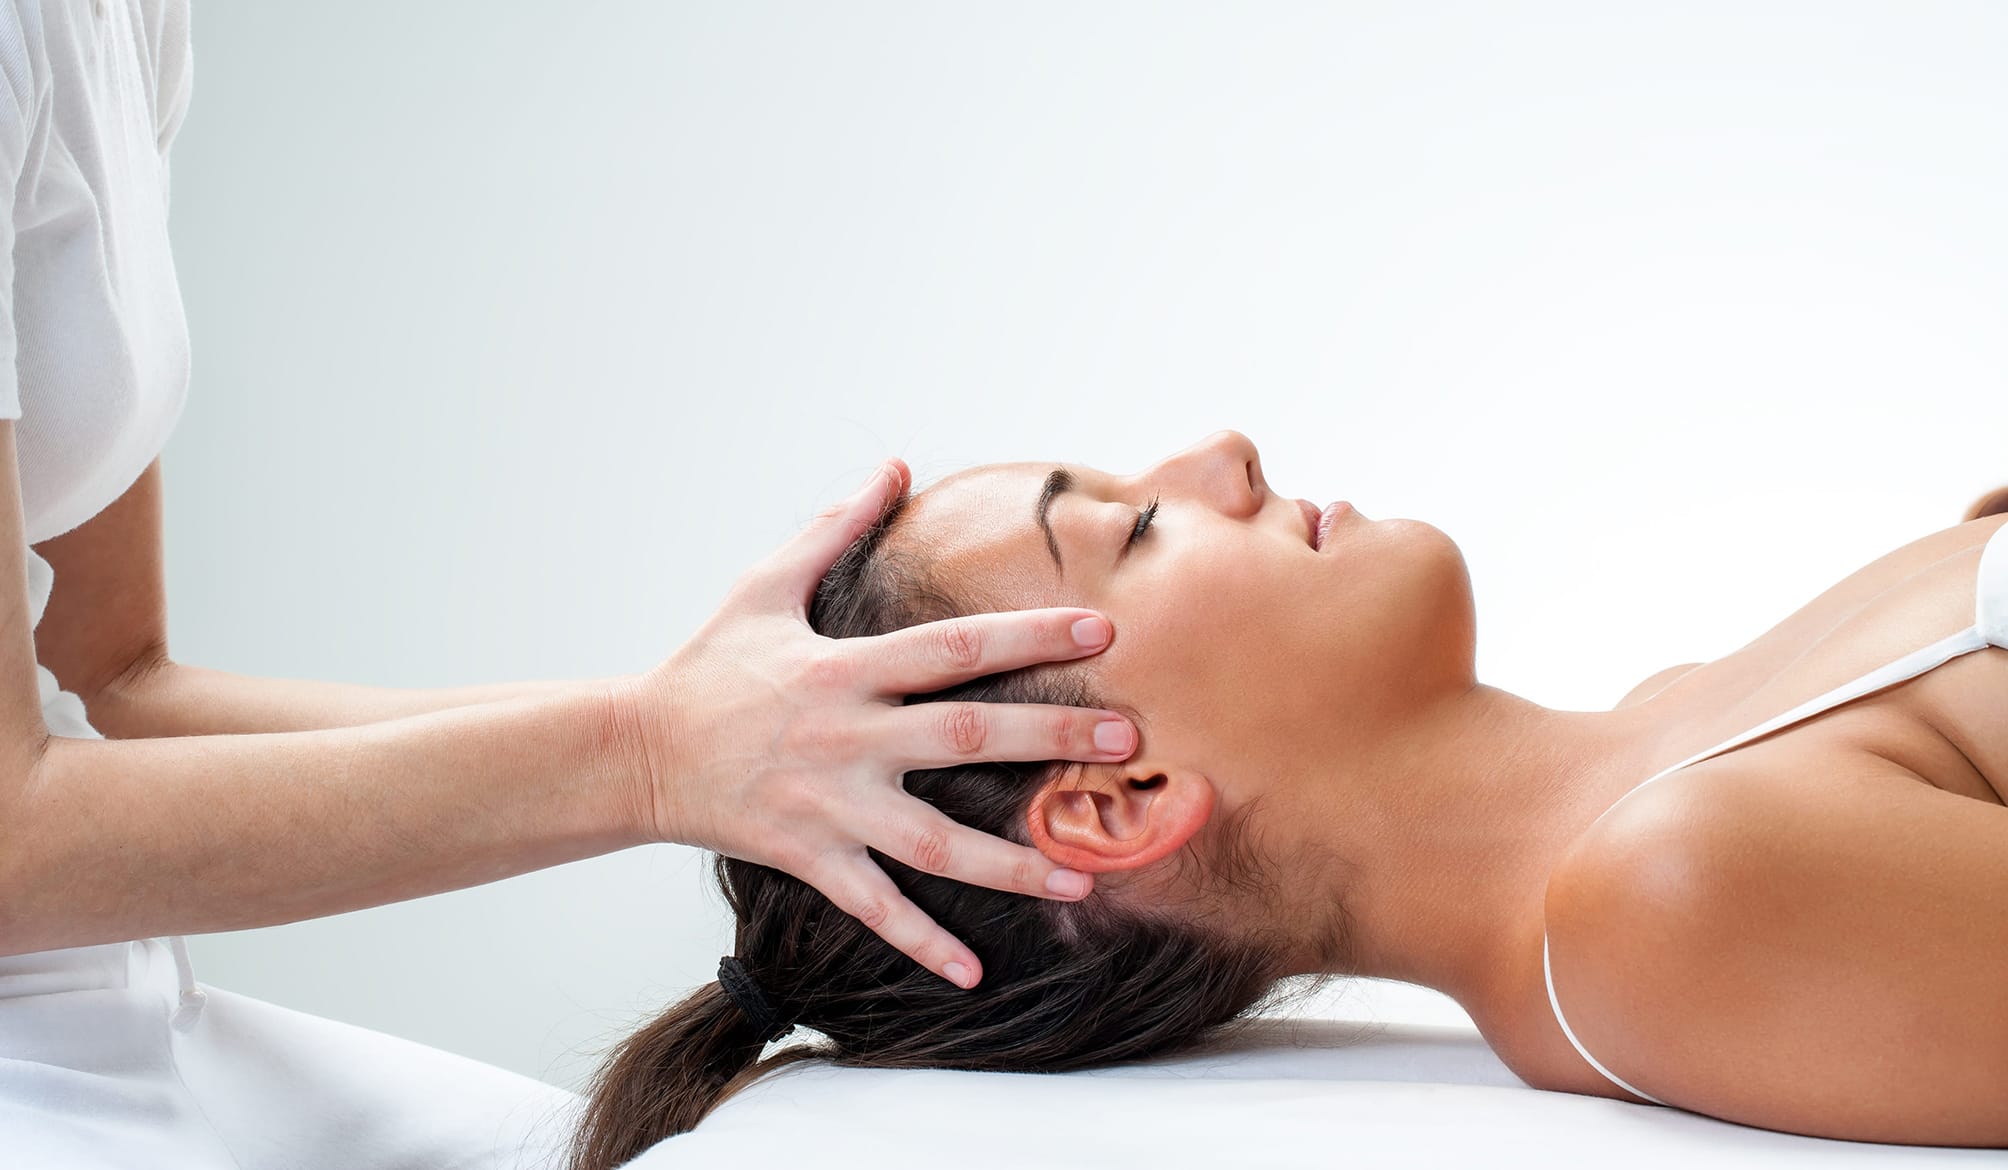 Healing osteopathic treatment on woman